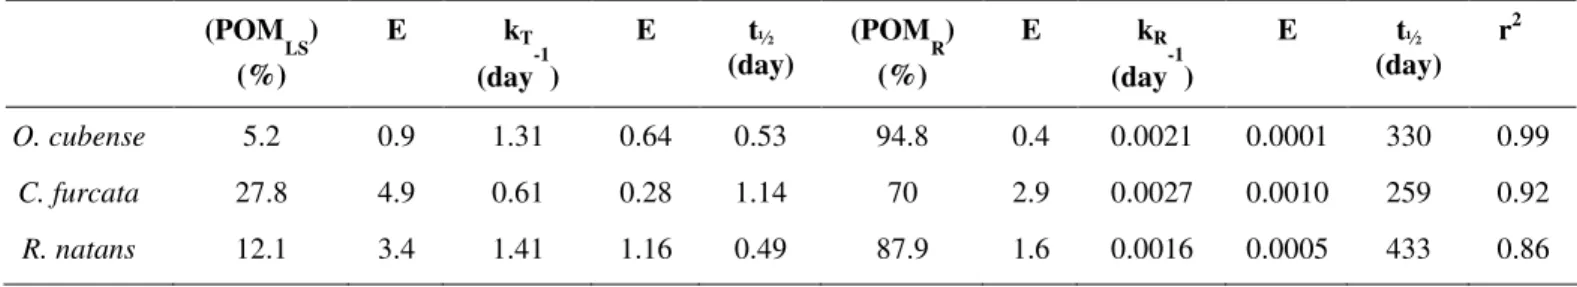 Table 1. Parameters obtained from organic matter decay model, where POM